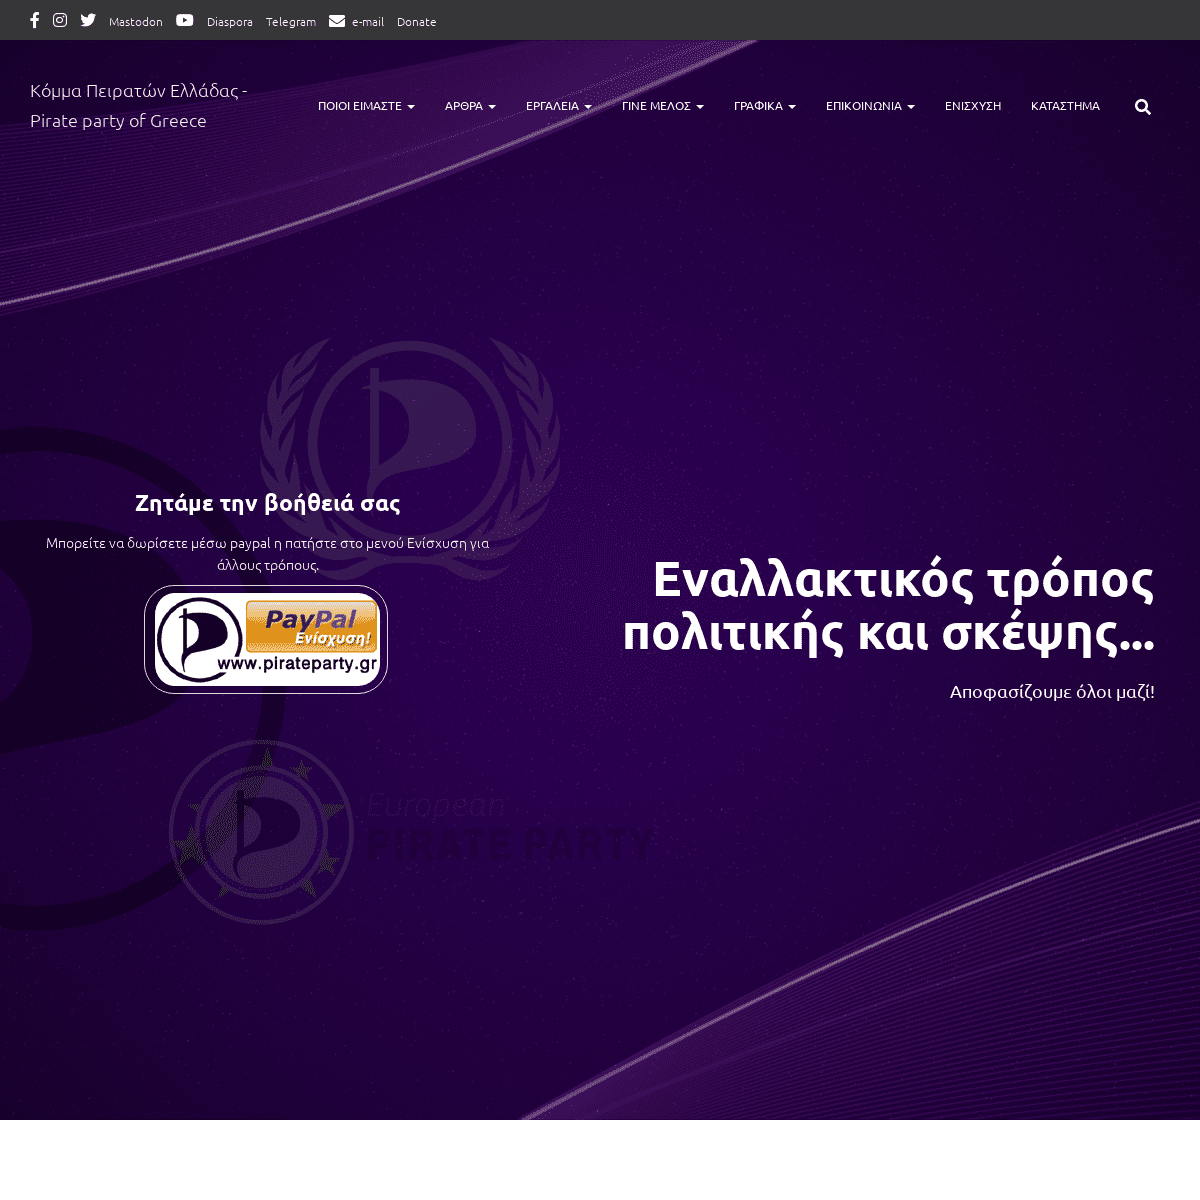 A complete backup of https://pirateparty.gr